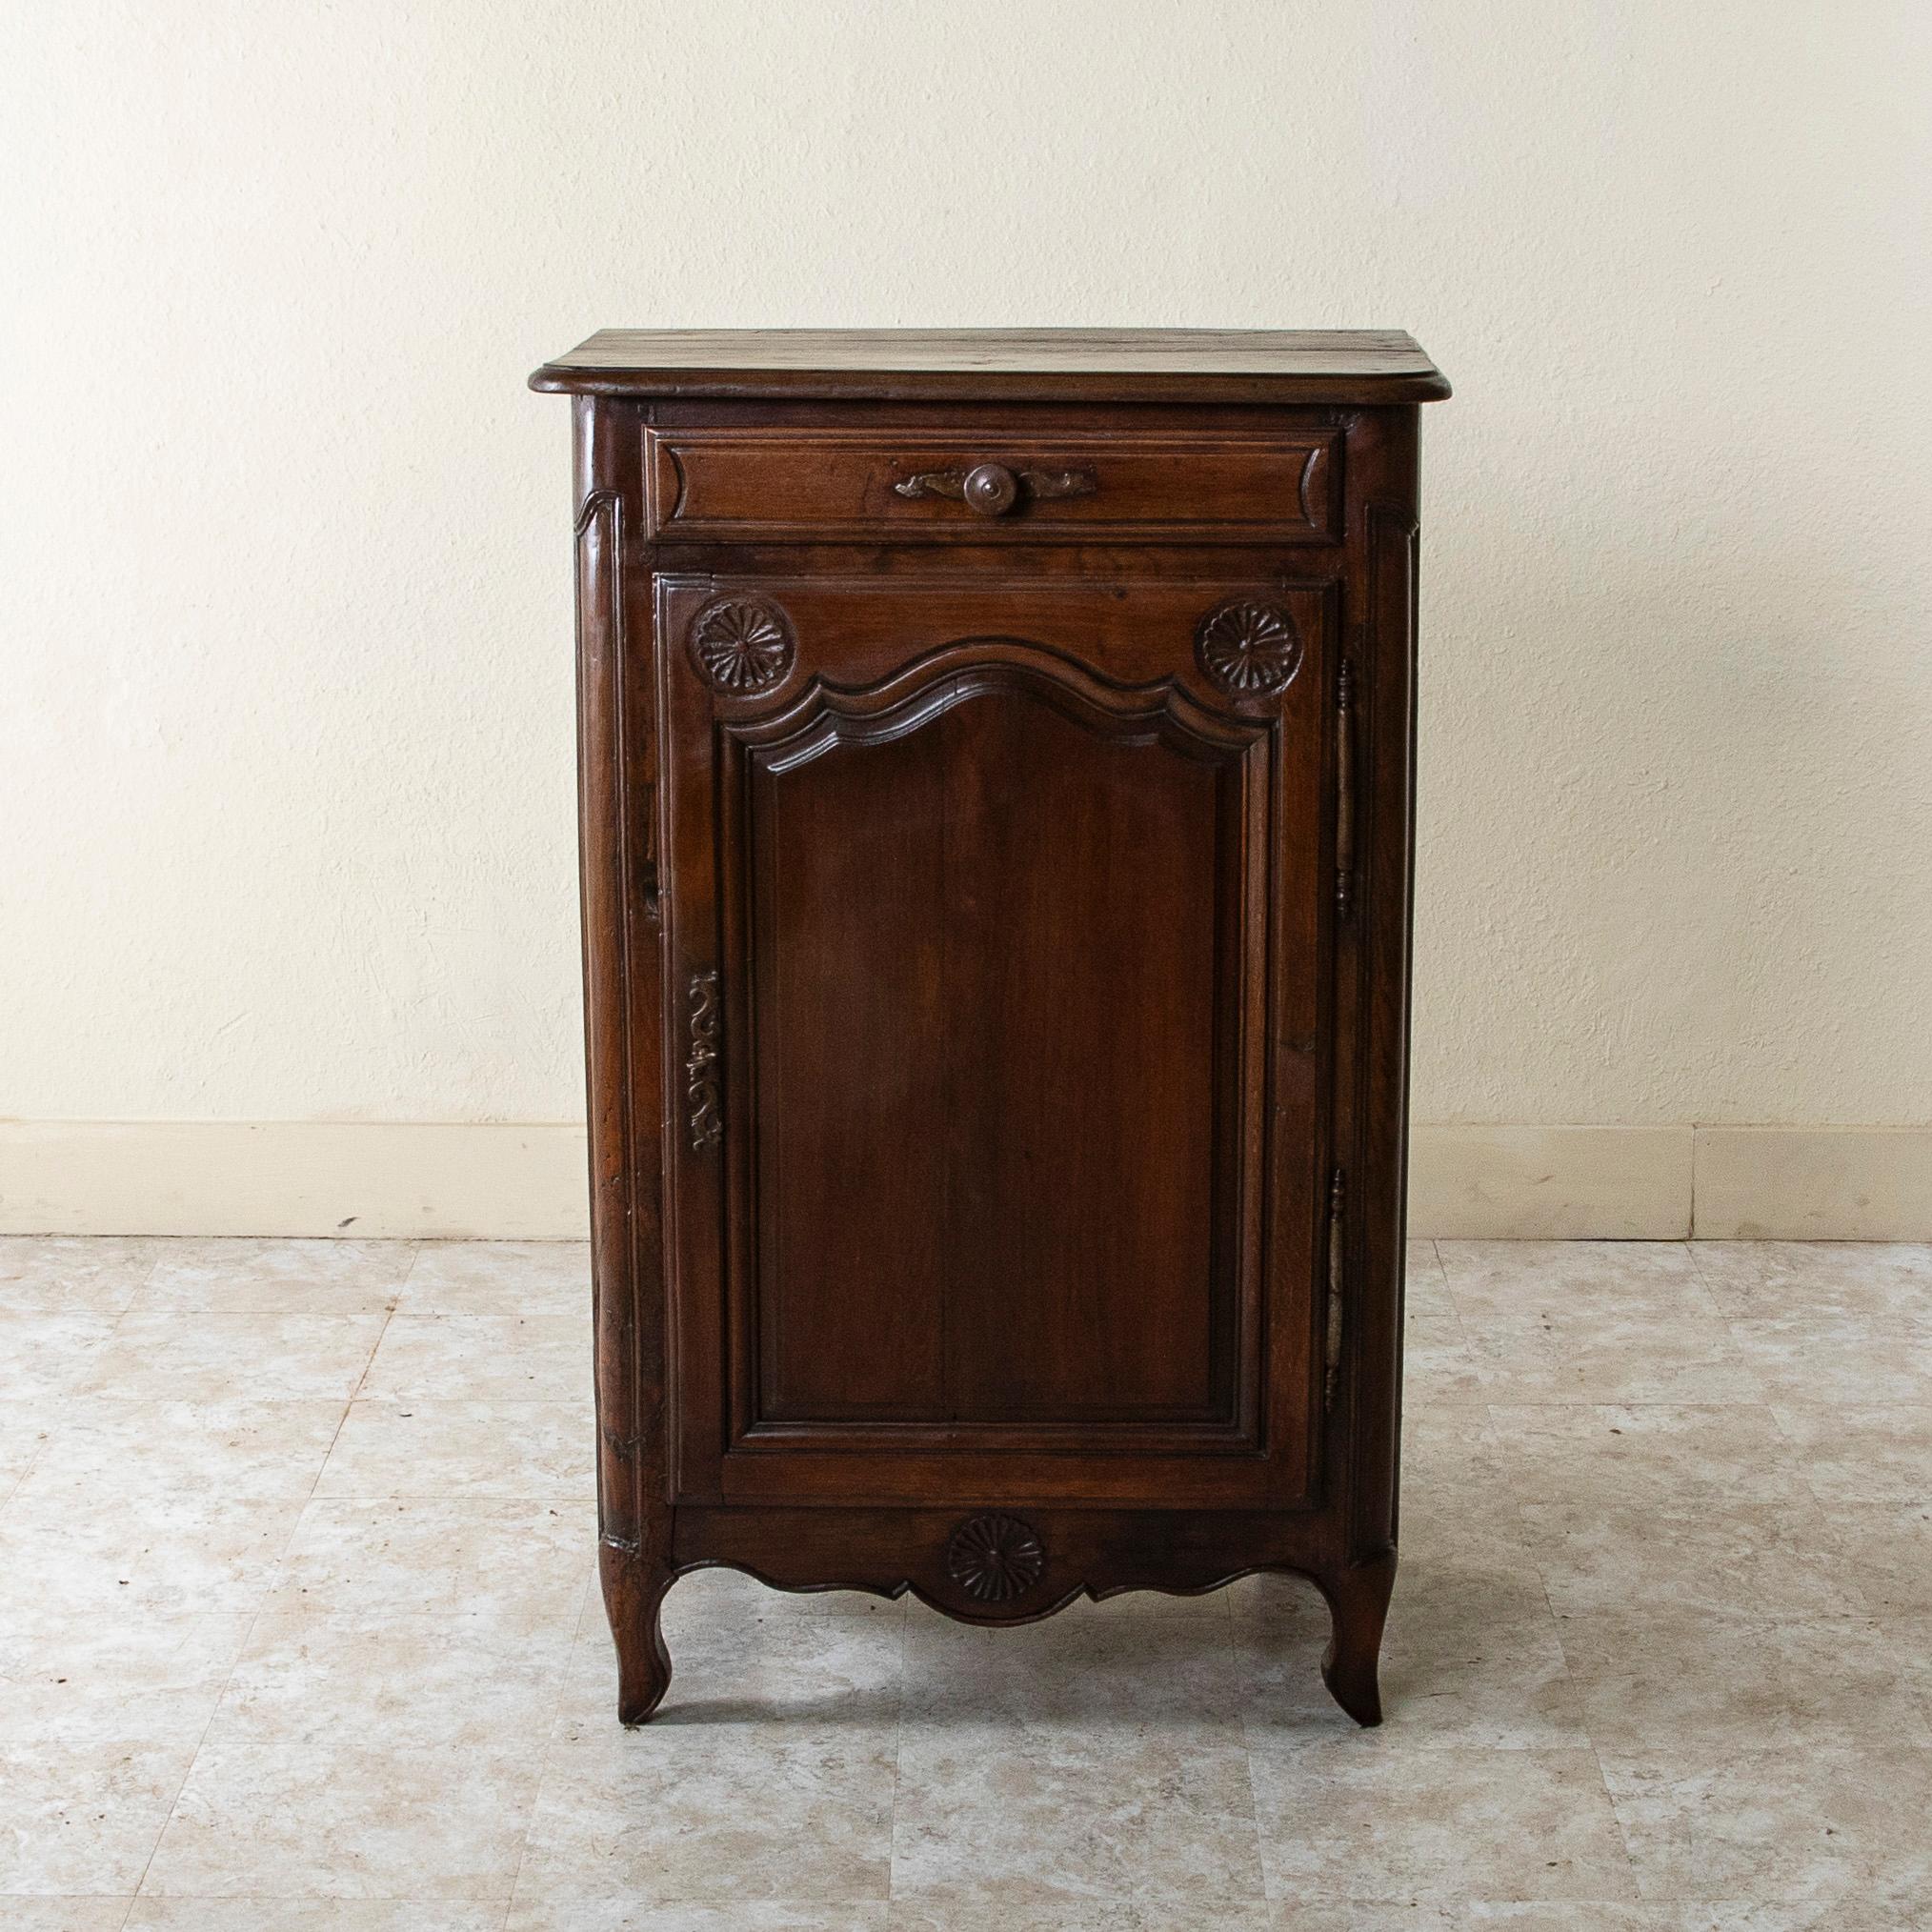 Standing at 37 inches in height, this tall nineteenth century oak jam cabinet from the region of Normandy, France, features hand carved regional details of rosettes on its facade. A single drawer below the beveled top opens with an iron drawer pull.